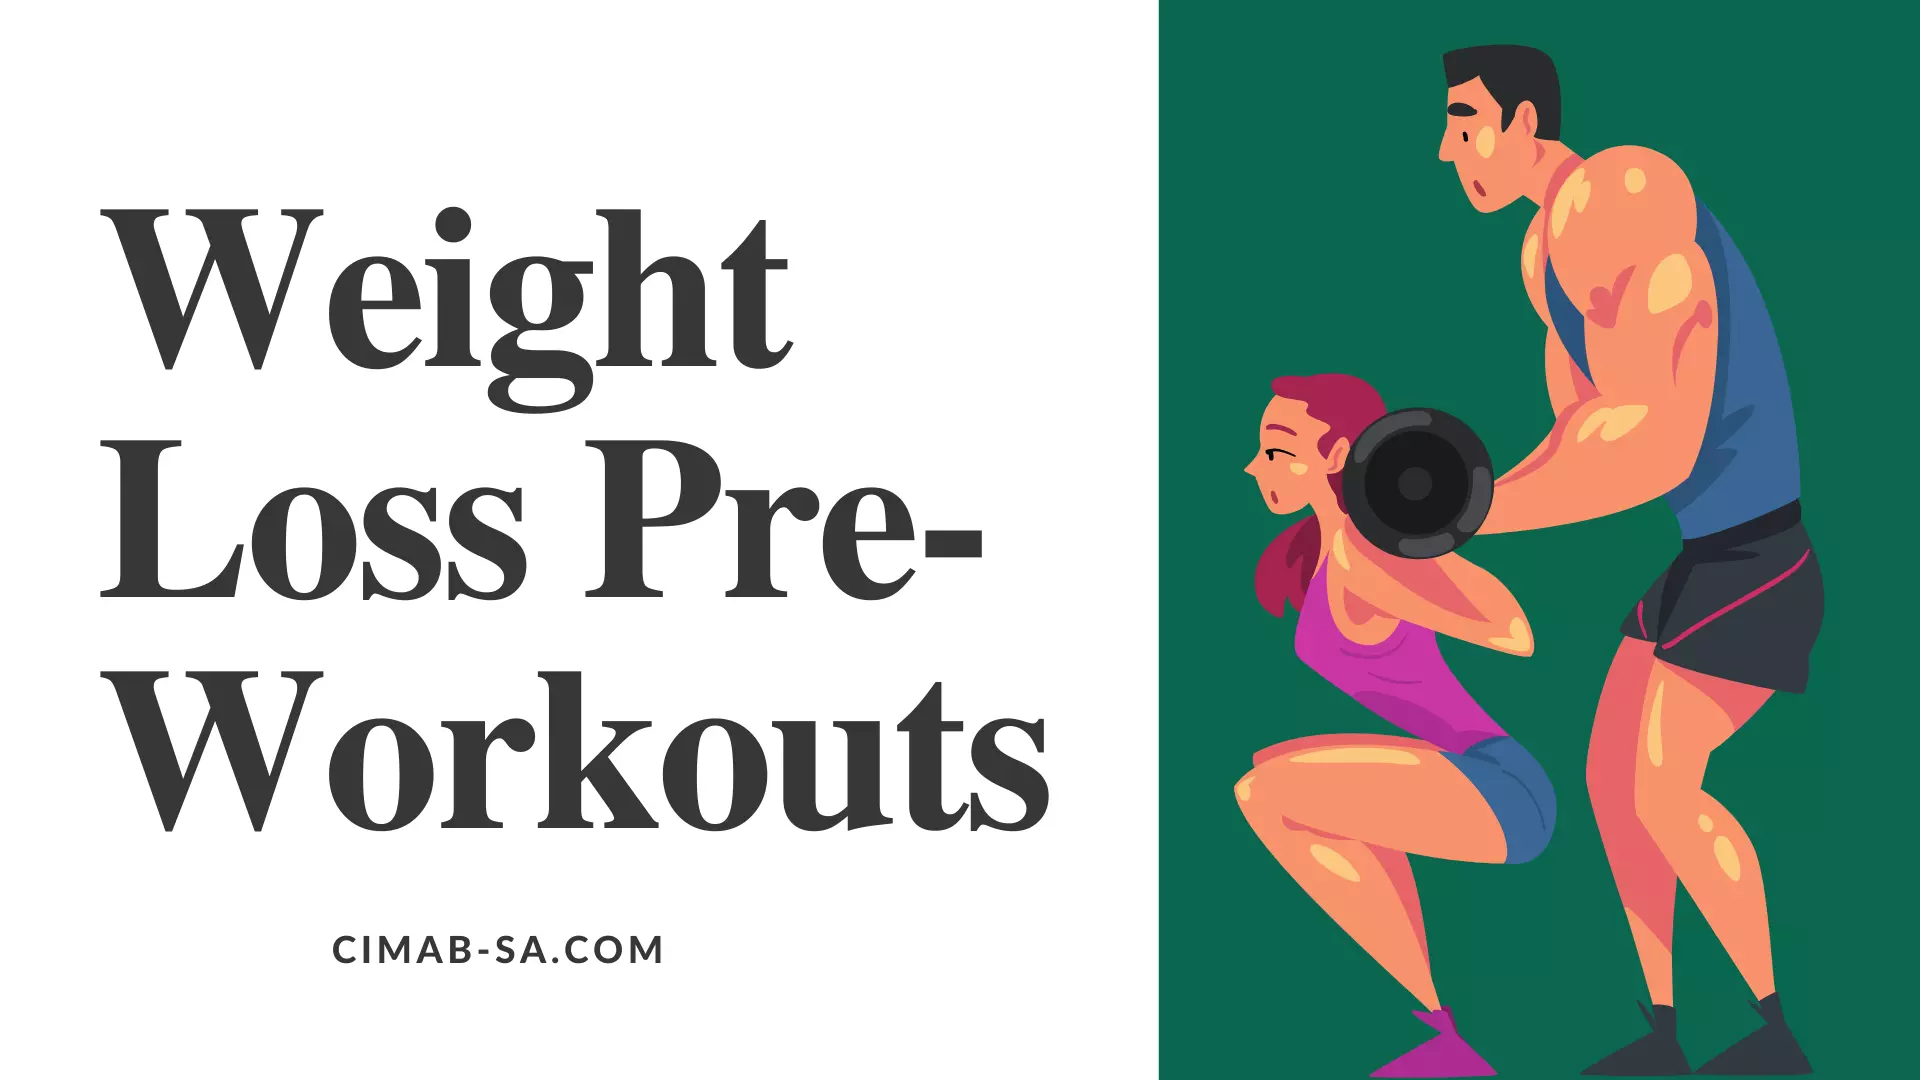 Weight Loss Pre-Workouts